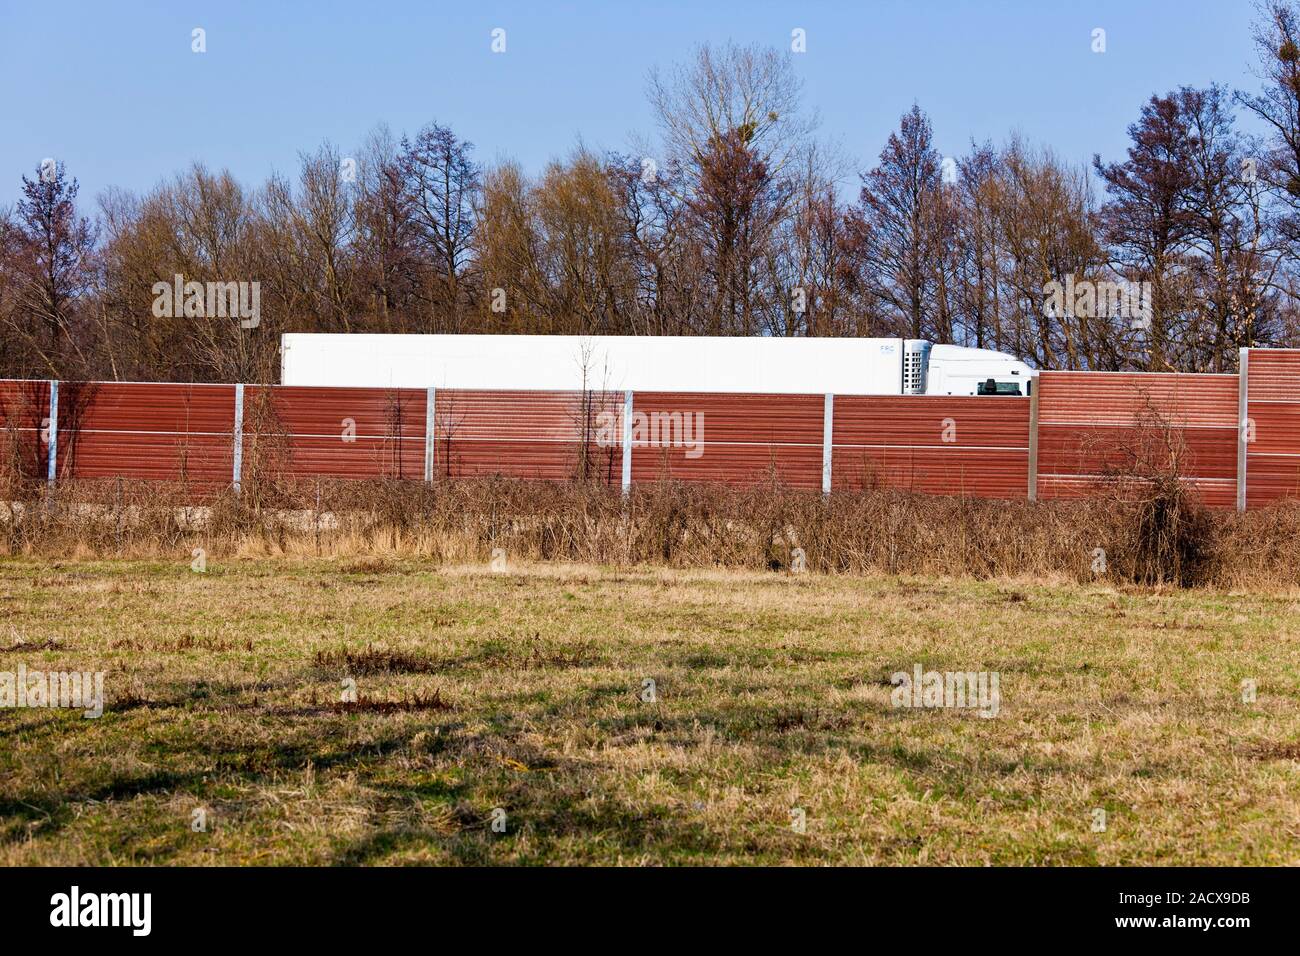 Noise barriers and trucks Stock Photo